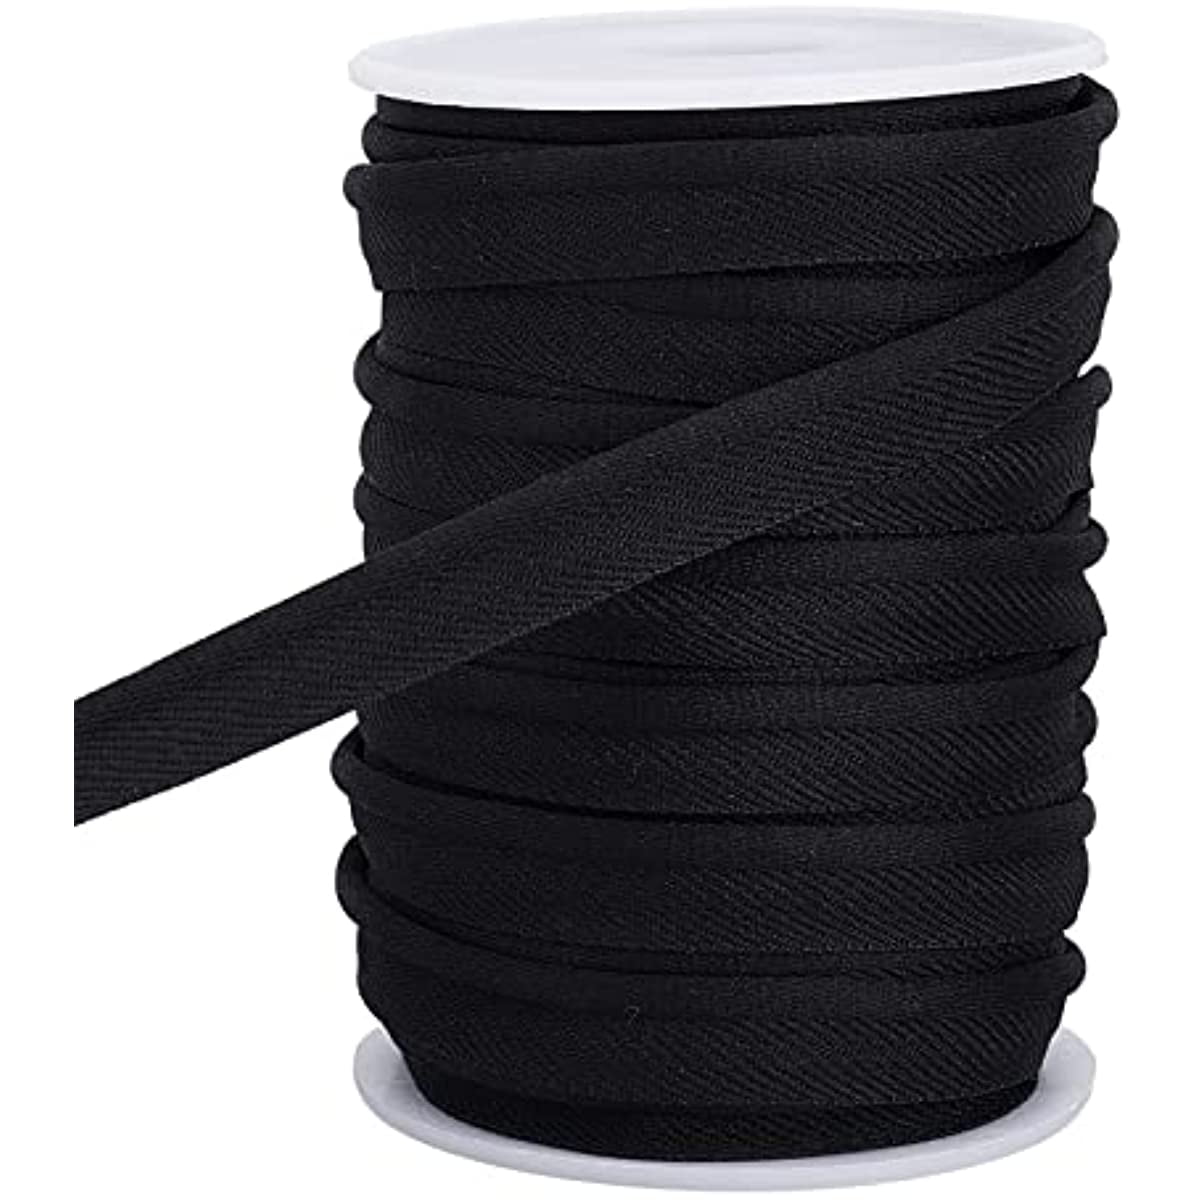 Cording Piping Cord Pipe Trim Fill Filler Cord - China Cotton Rope